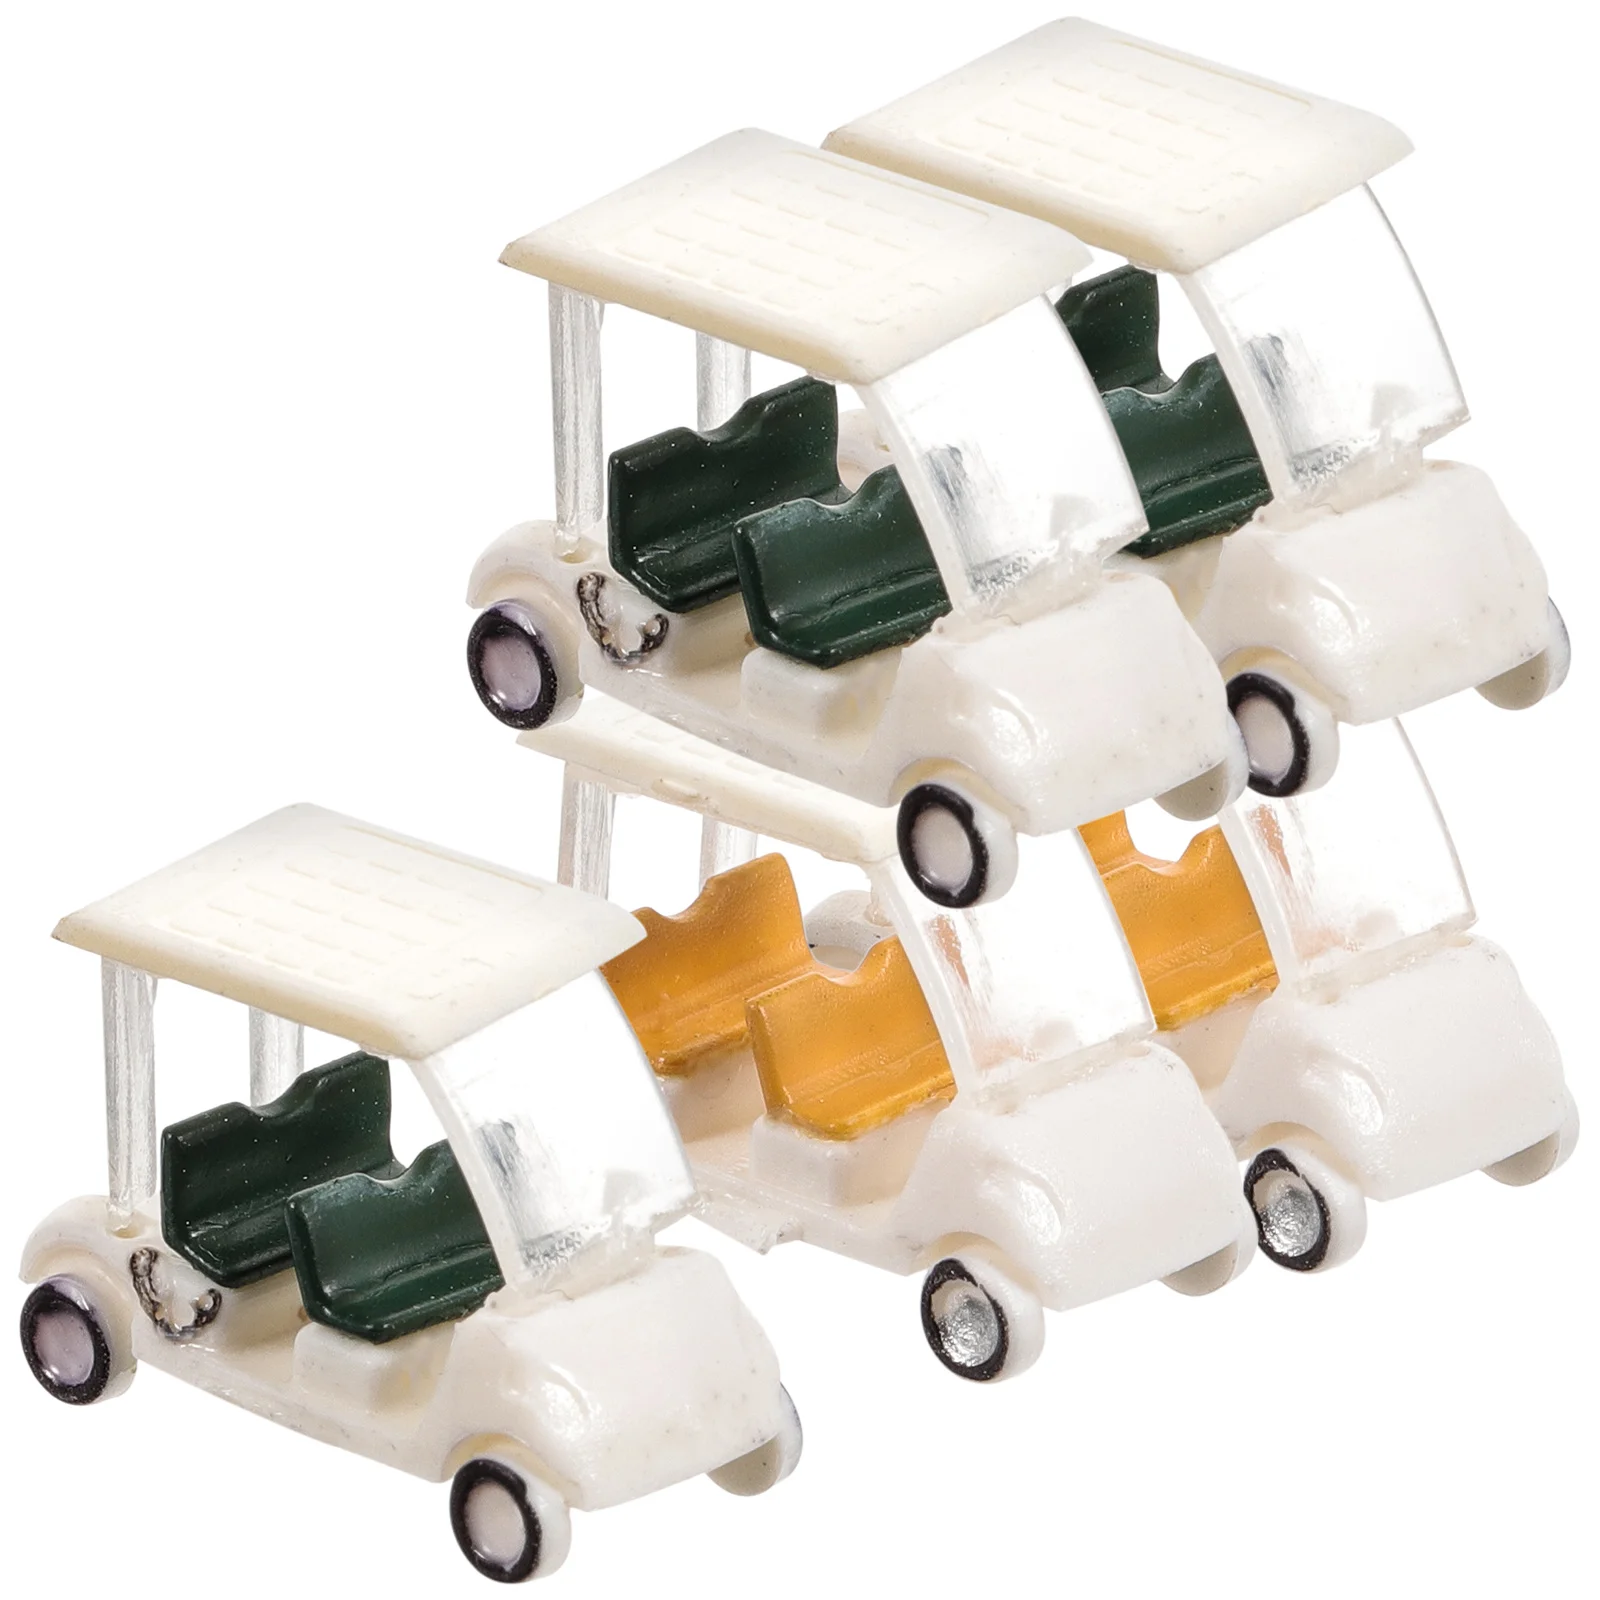 

Simulation Golf Cart Vehicles Sand Table Golfs Prop Small Decor Toy Mini Model